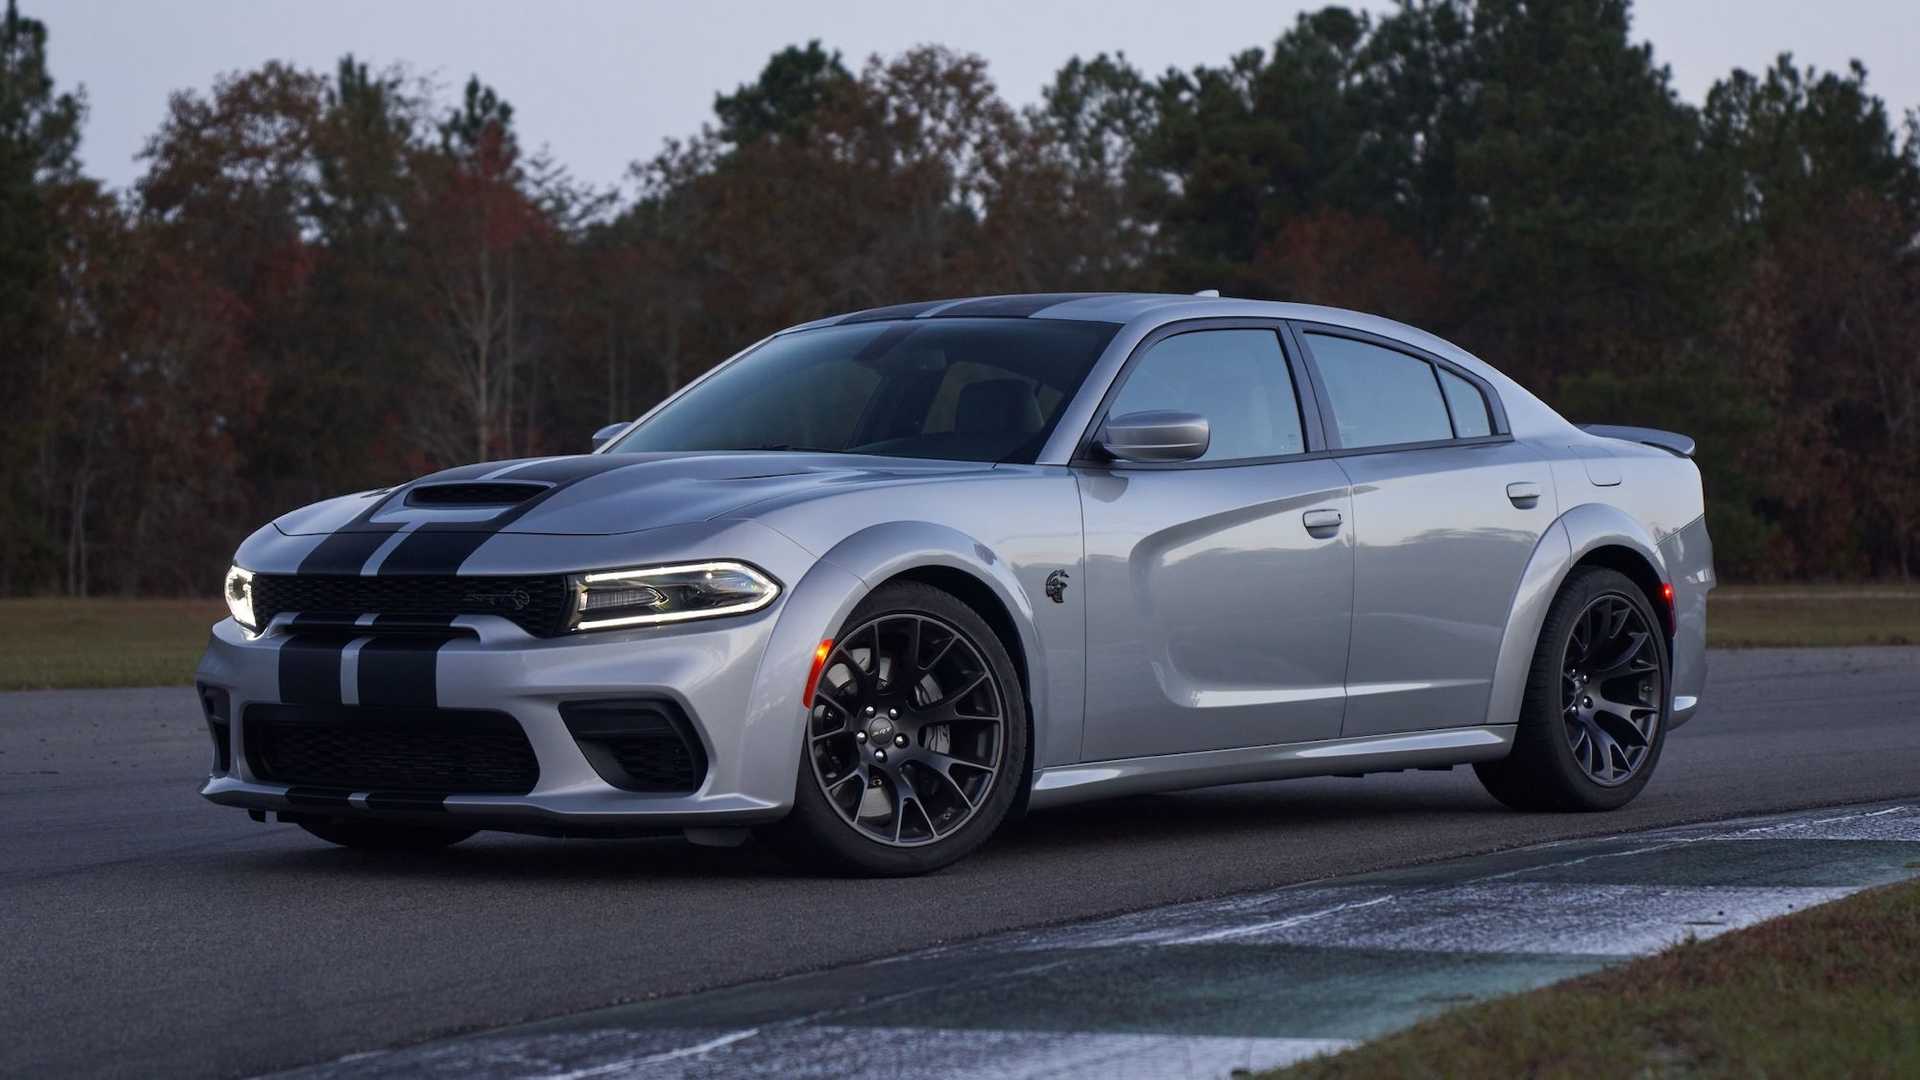 Dodge Charger Hellcat Redeye First Drive Review: Next Level